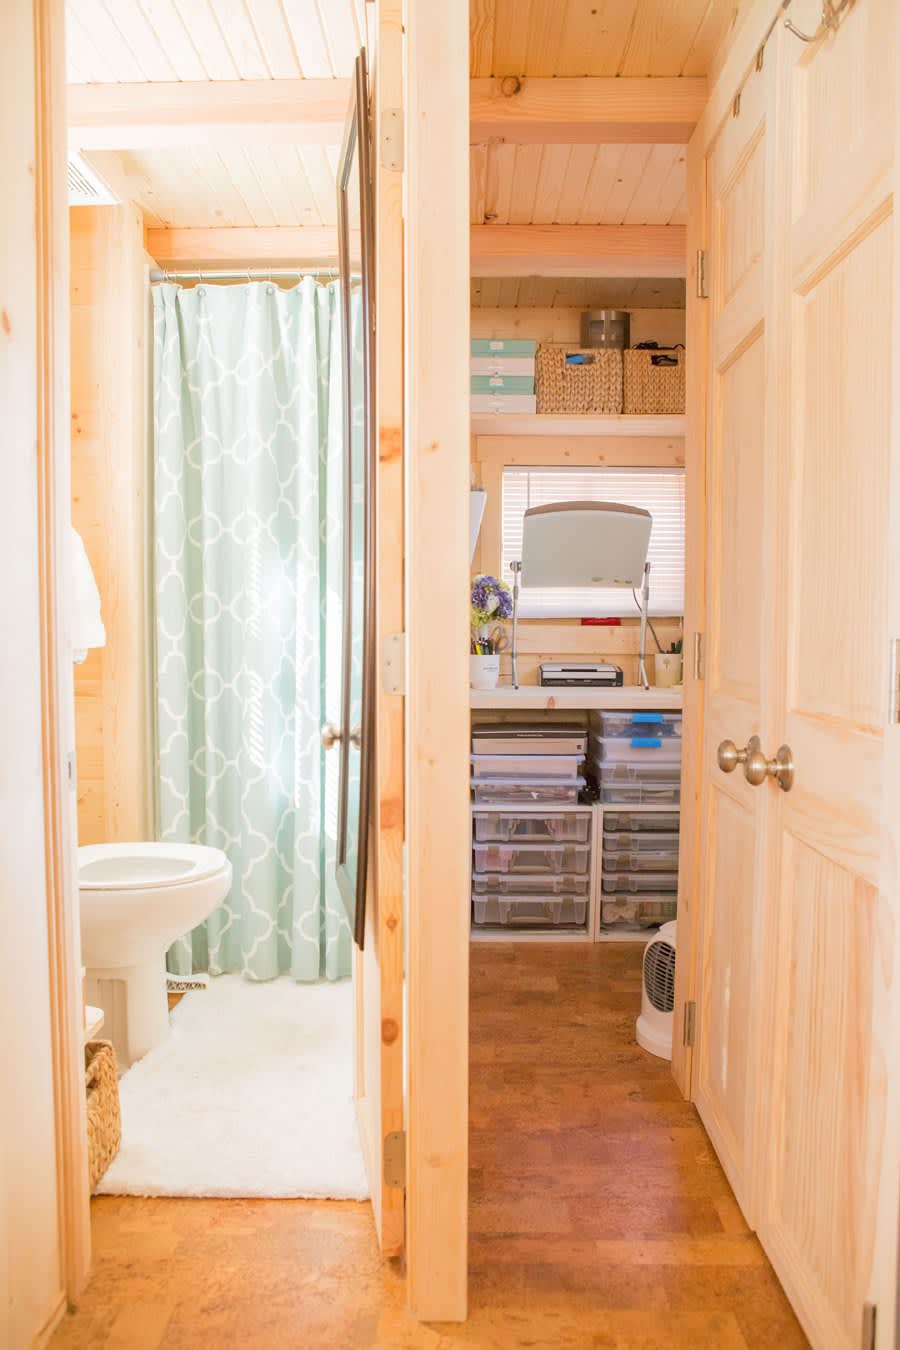 What It's Really Like to Live in a Tiny House Community